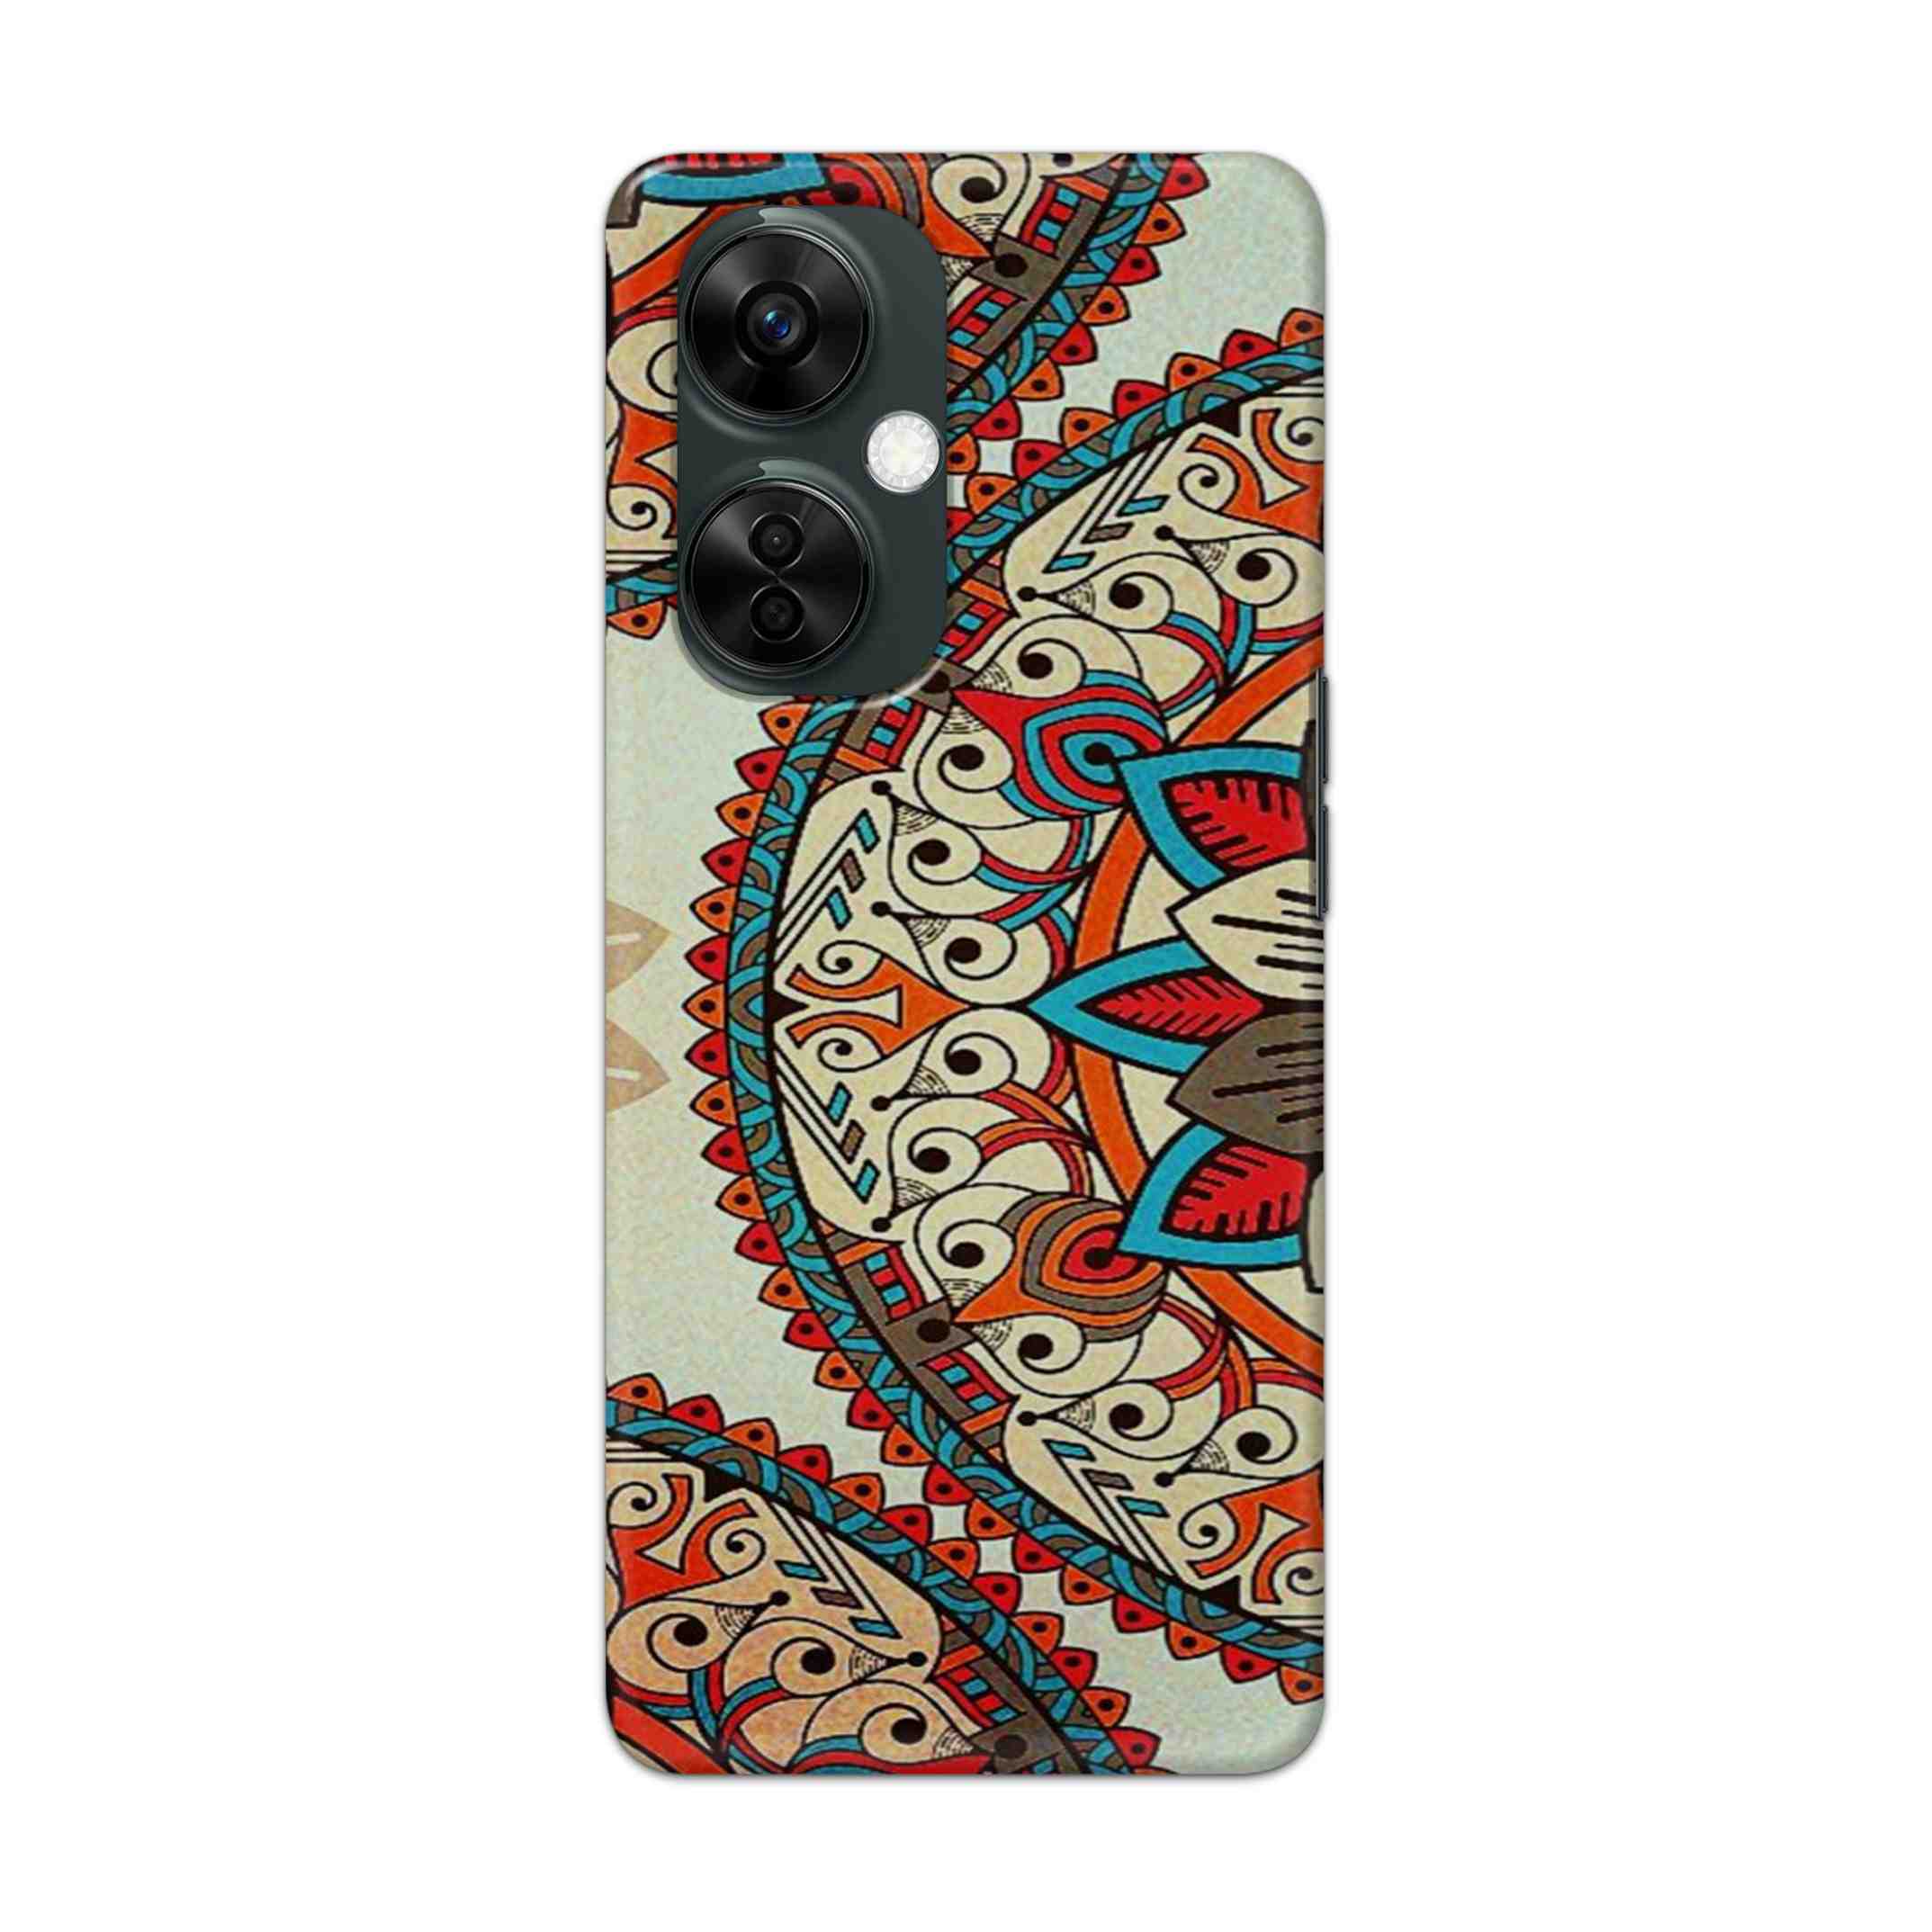 Buy Aztec Mandalas Hard Back Mobile Phone Case Cover For Oneplus Nord CE 3 Lite Online